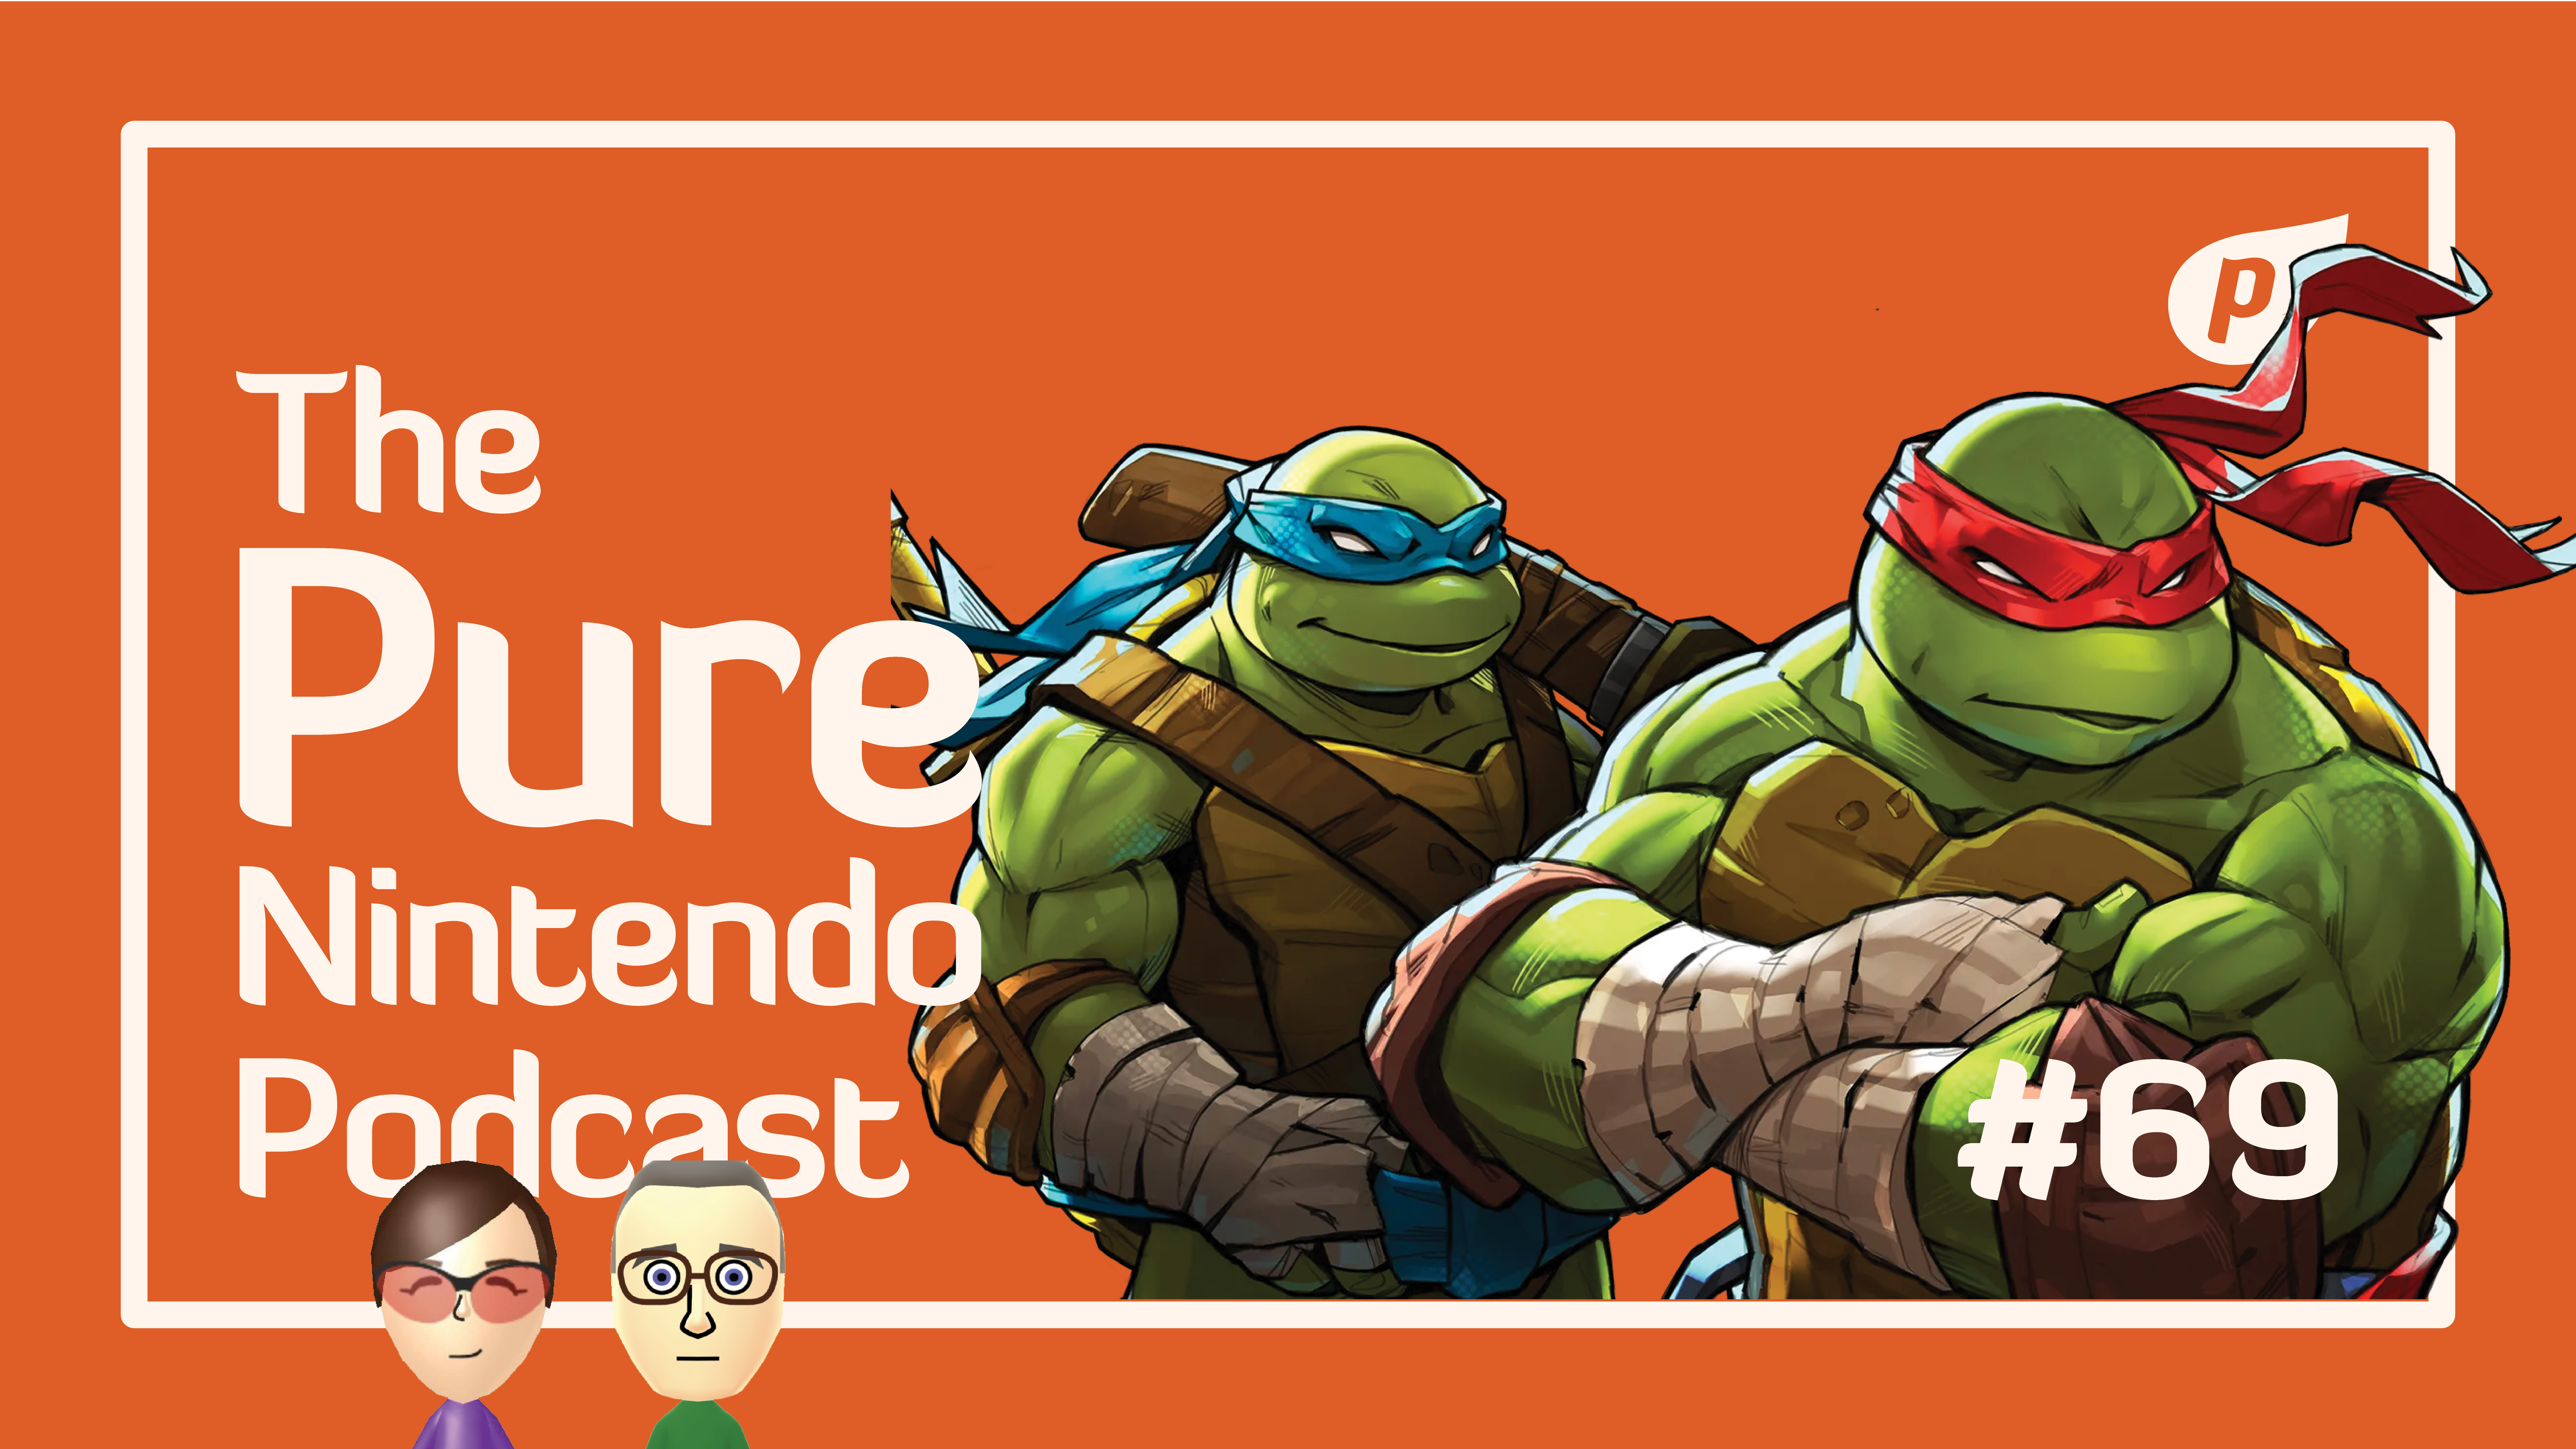 Pure Nintendo Podcast E69 | All the love for TMNT, plus more Luigi, and collecting rocks with Link!